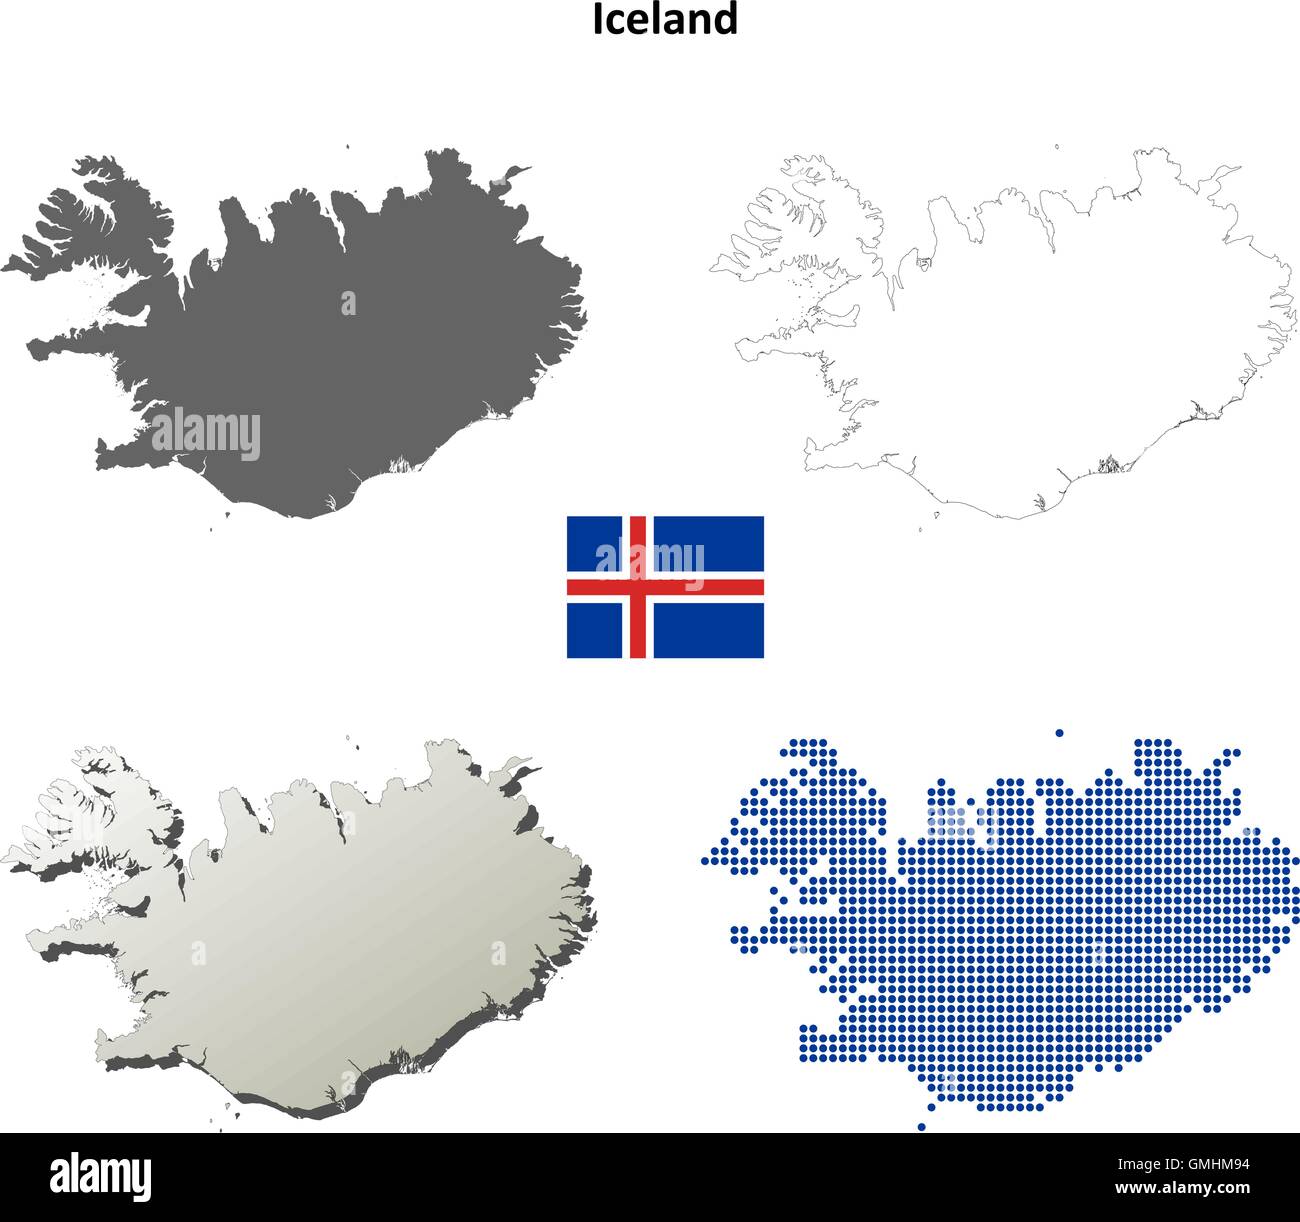 Iceland outline map set Stock Vector